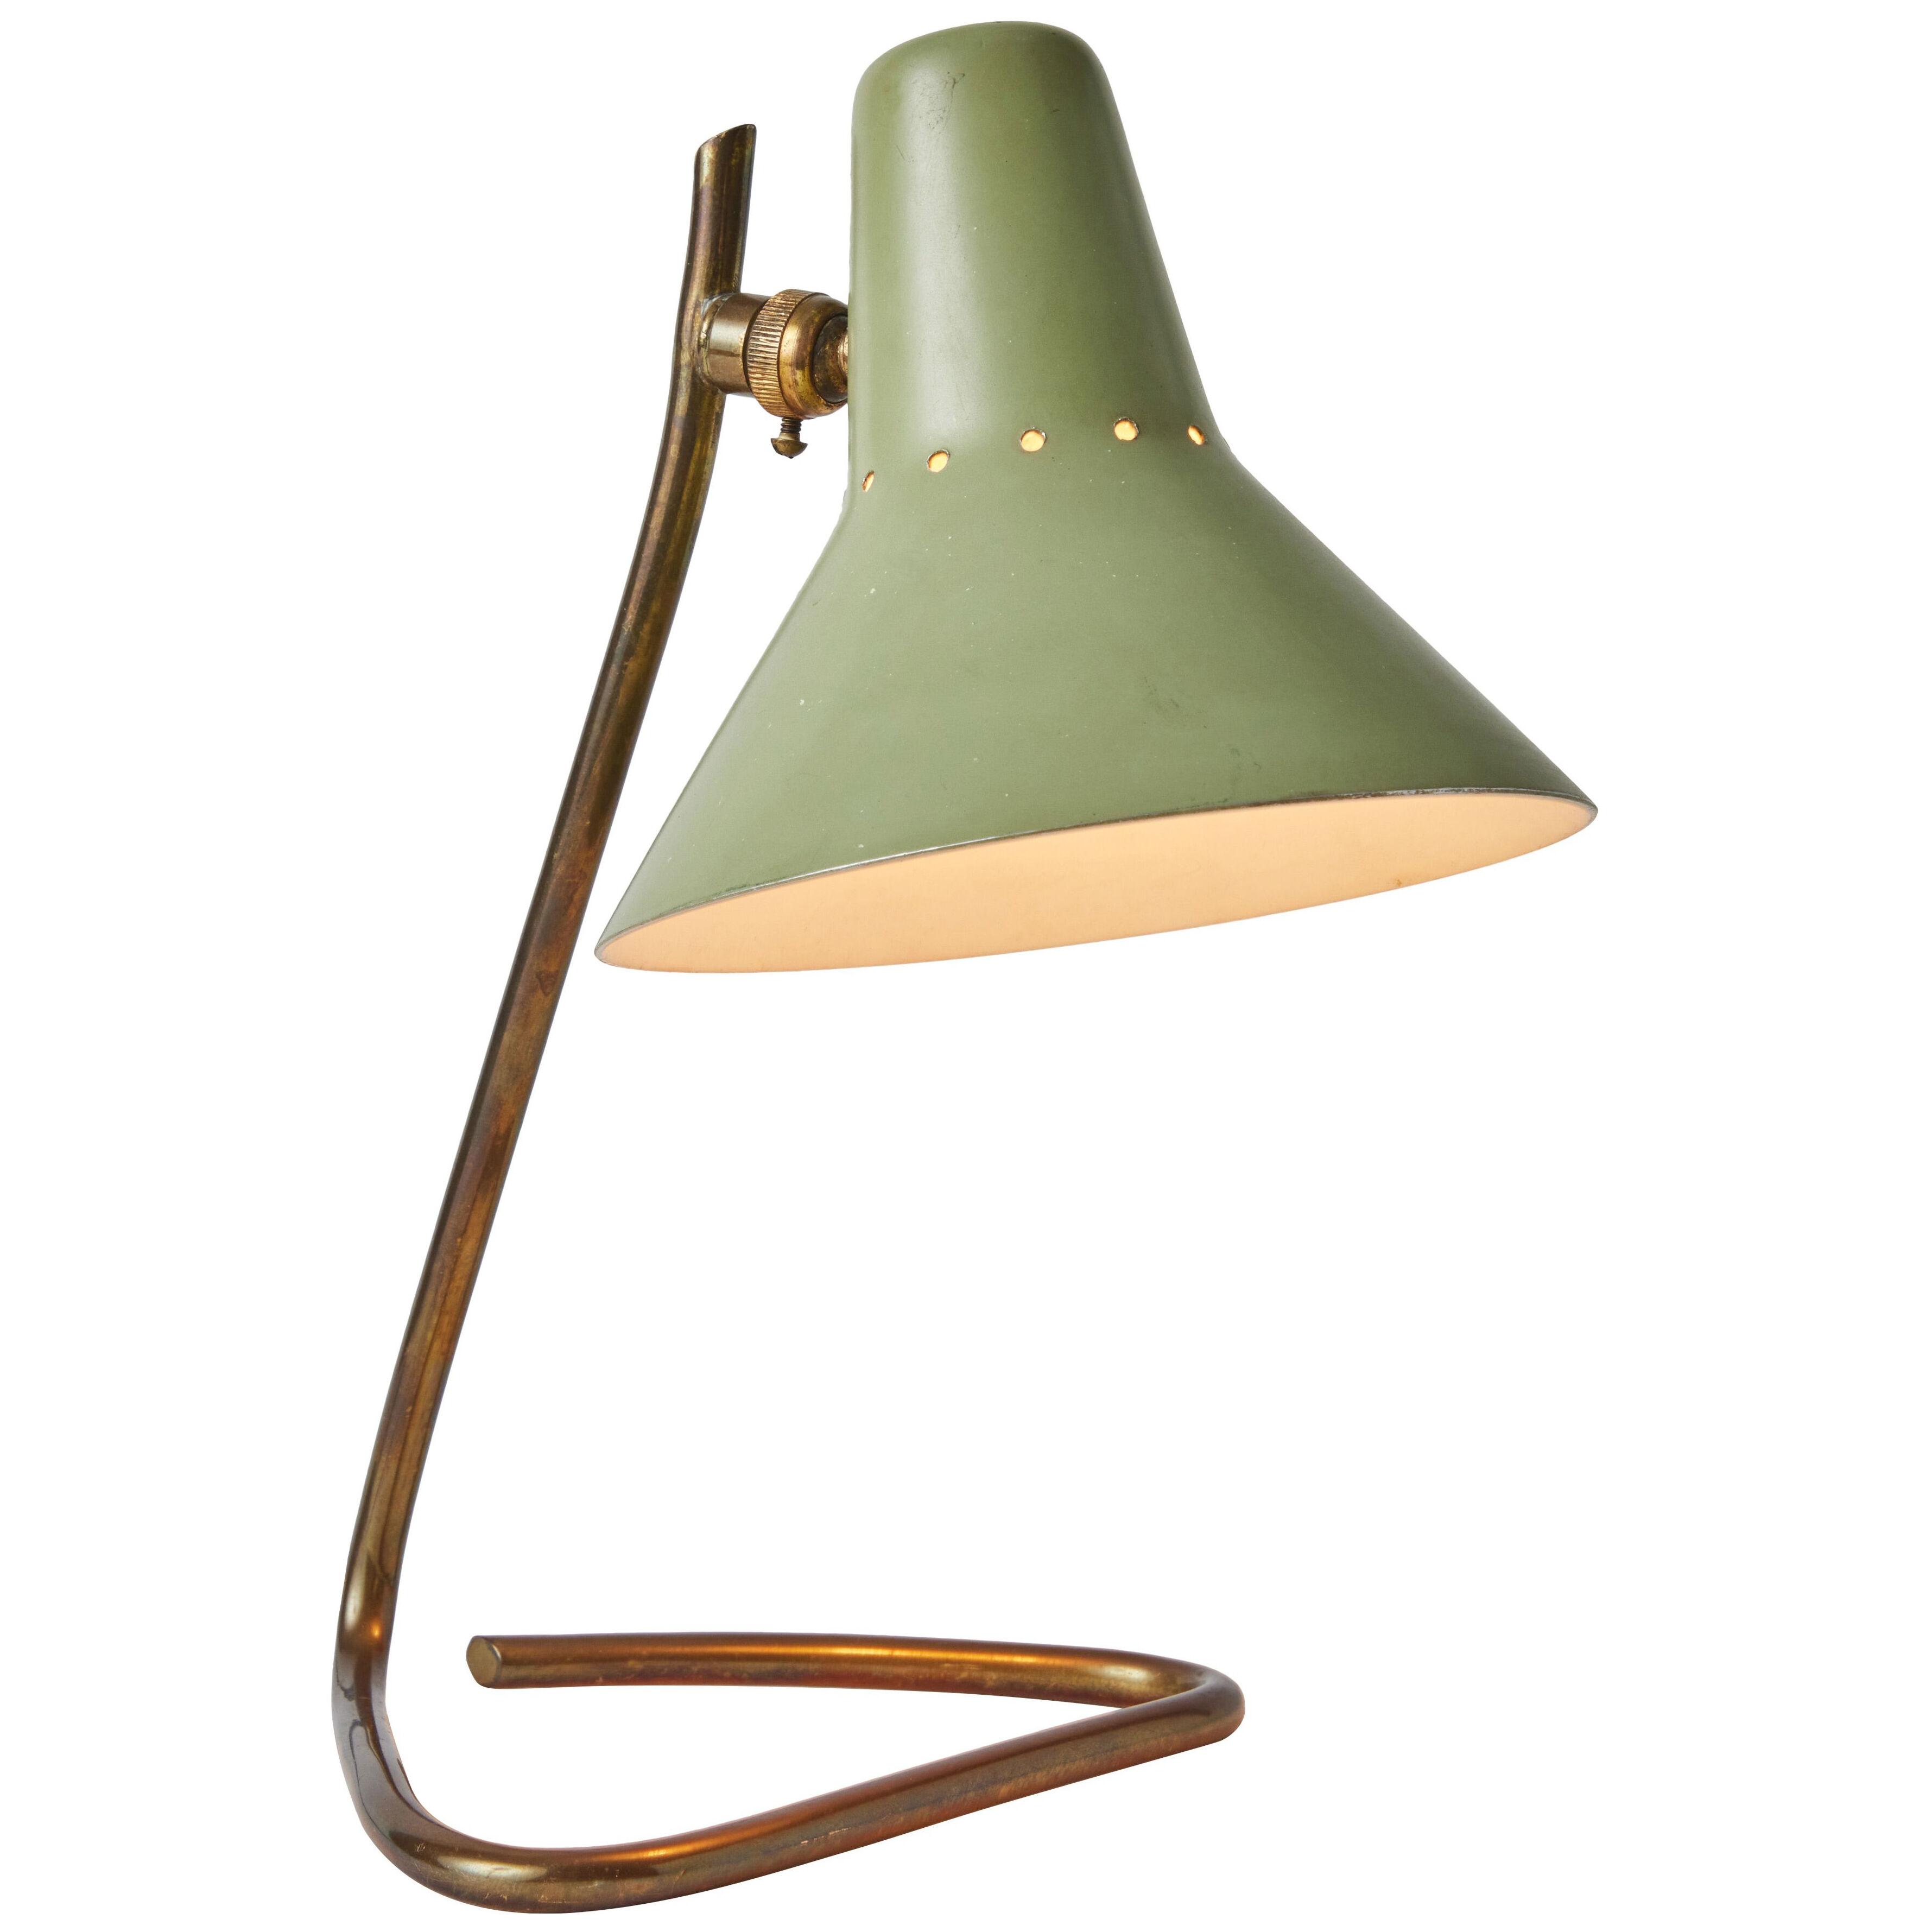 1960s Giuseppe Ostuni Green Metal and Brass Table Lamp for O-Luce